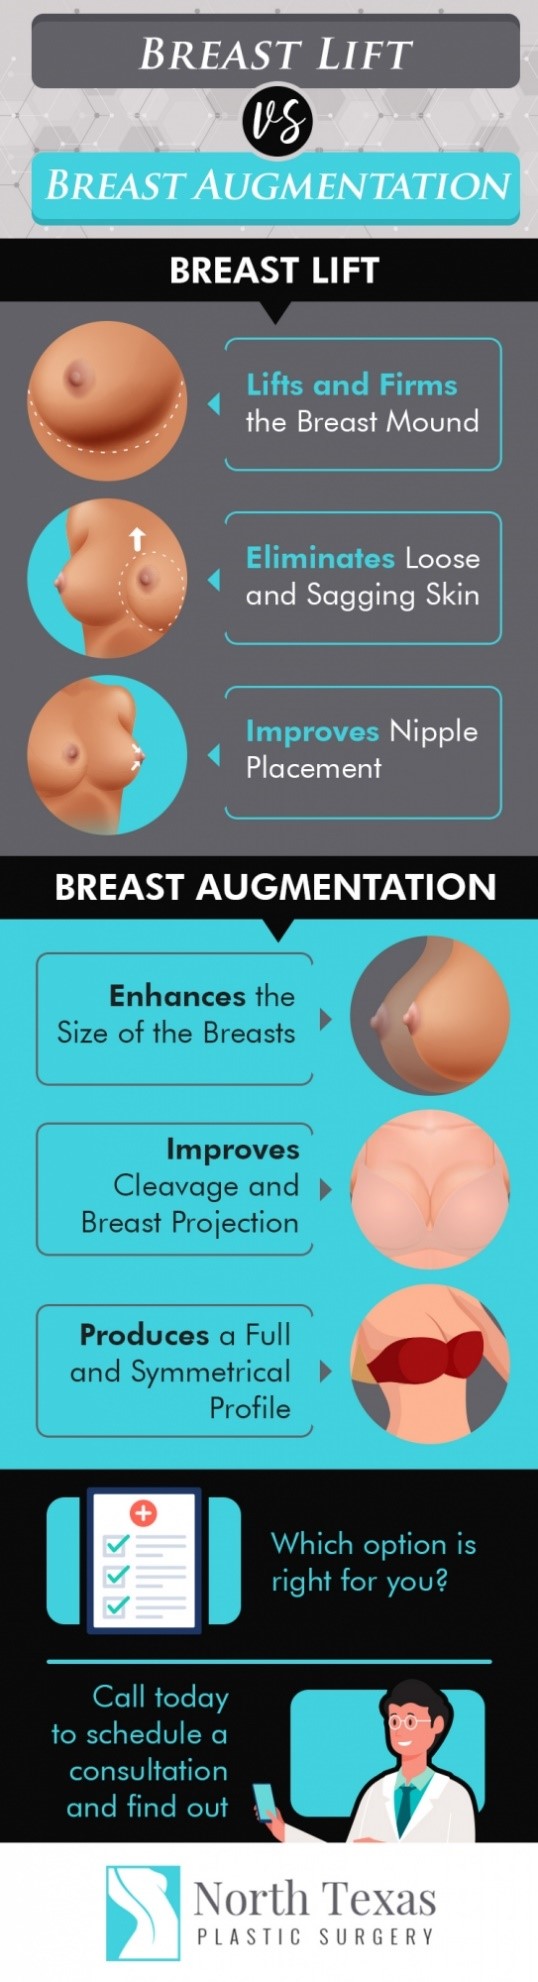 Breast Lift with Implants: Benefits vs. Risks